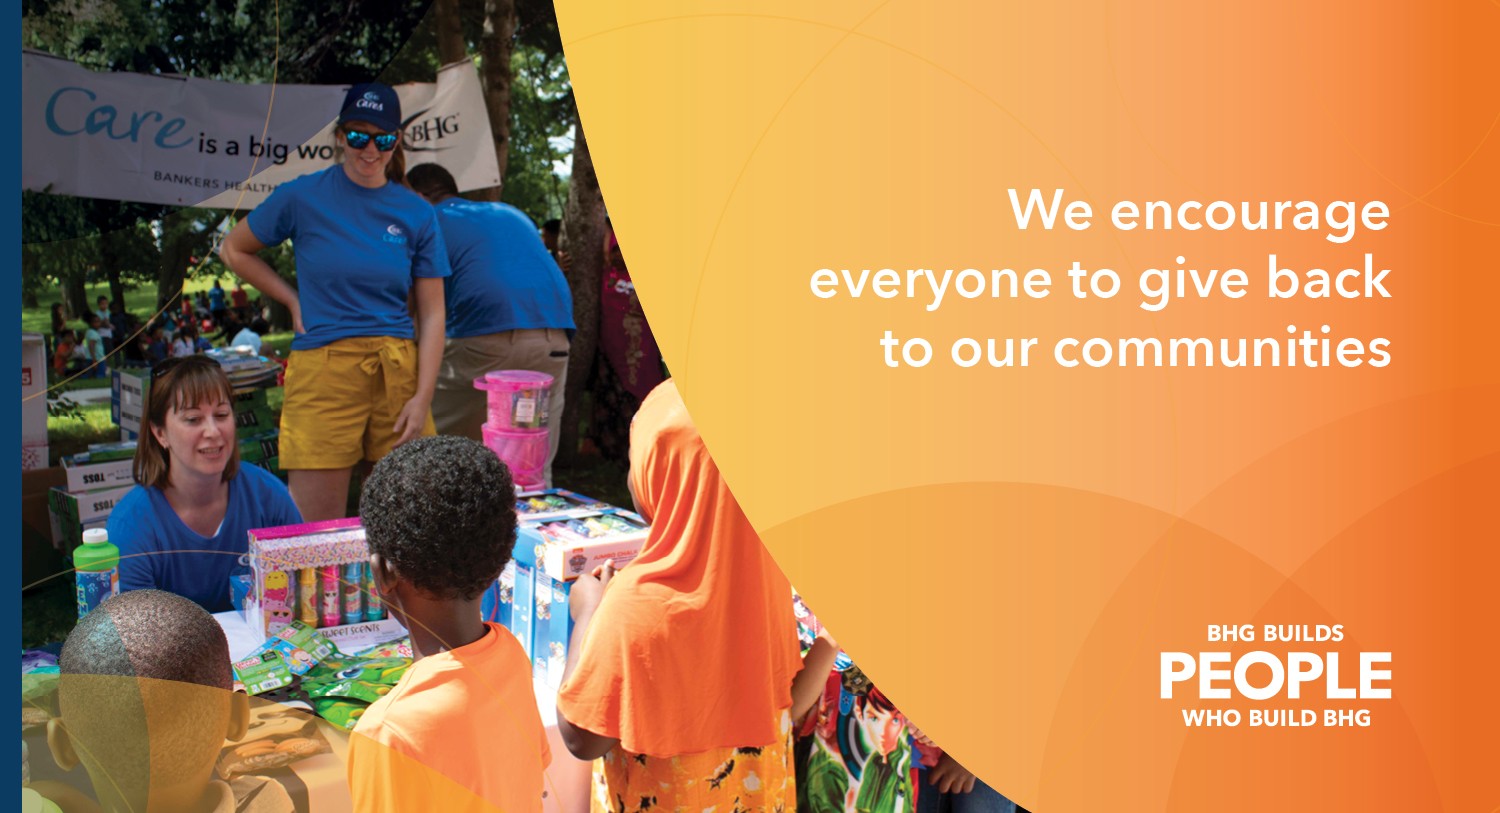 We encourage everyone to give back to our communities.